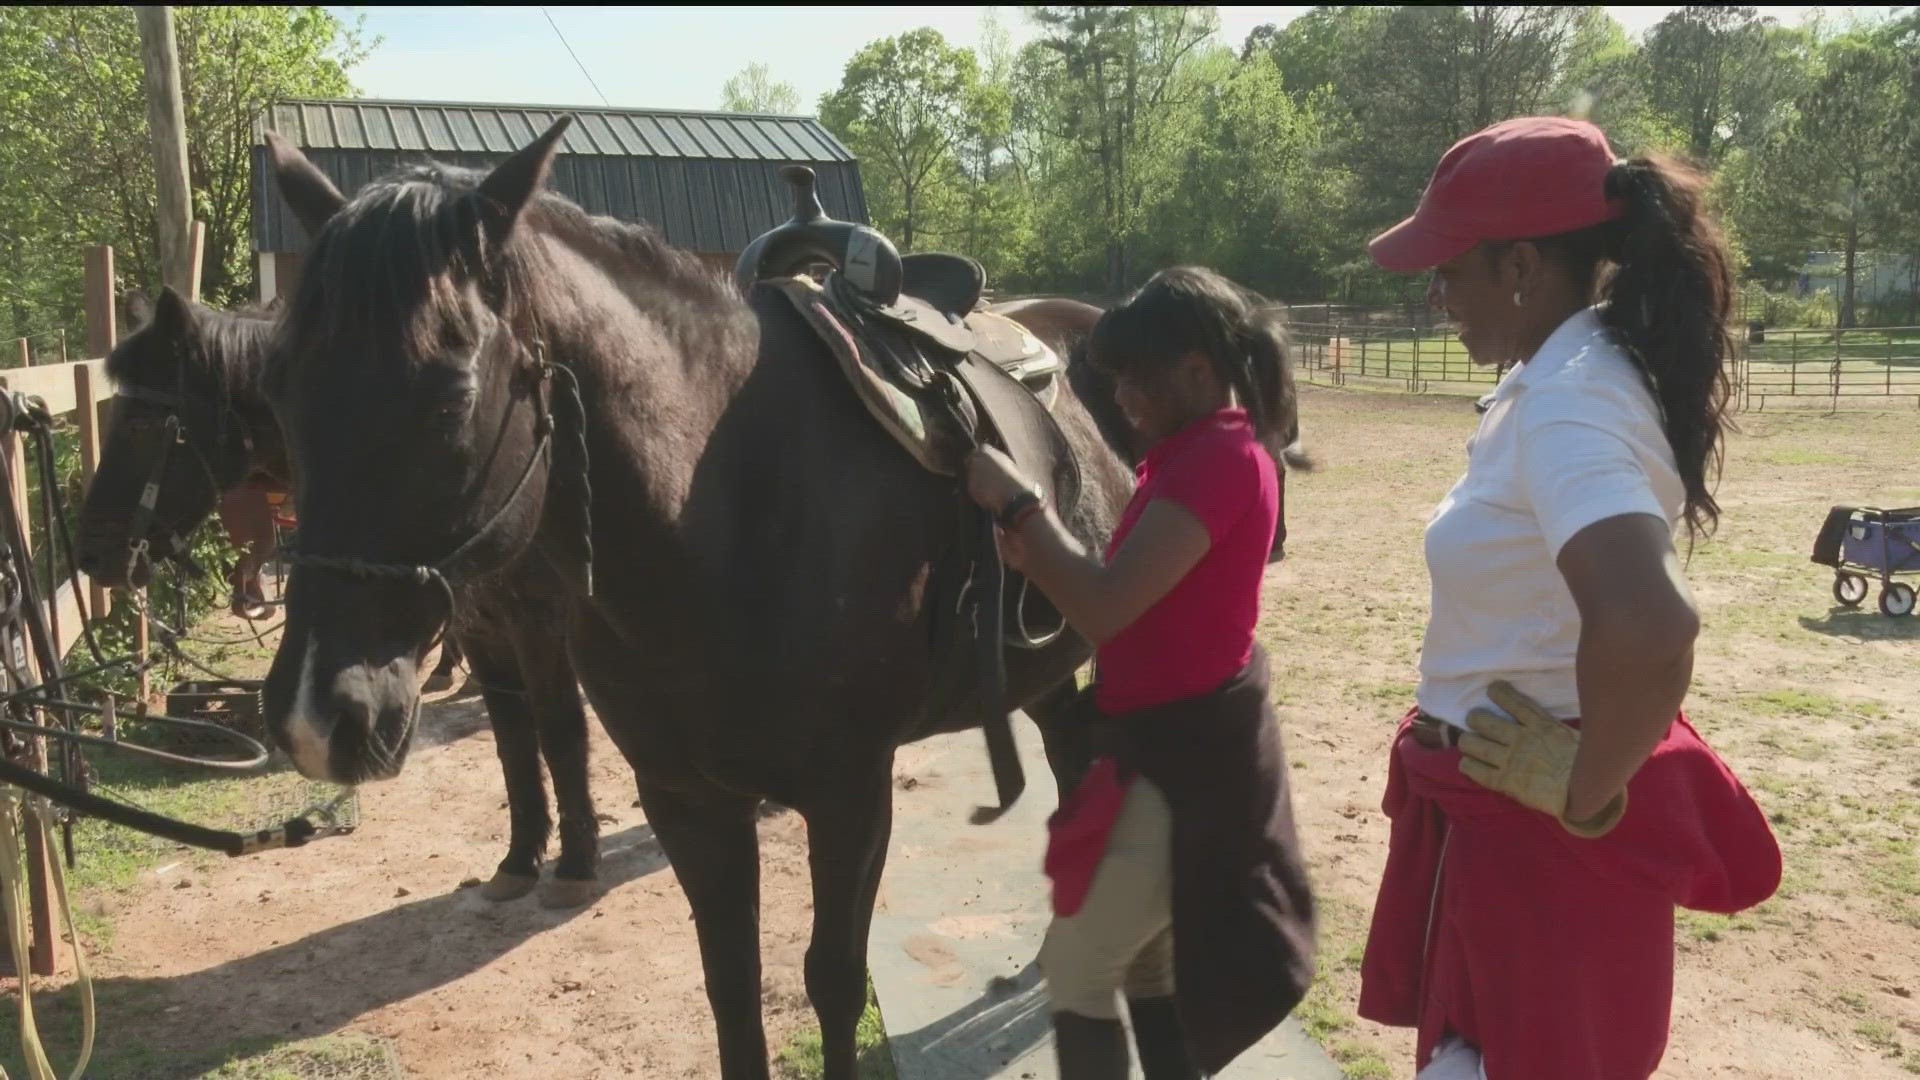 Lilly Morgan, the founder of Morgan Valley Ranch Academy, said horses help the teens better understand themselves.